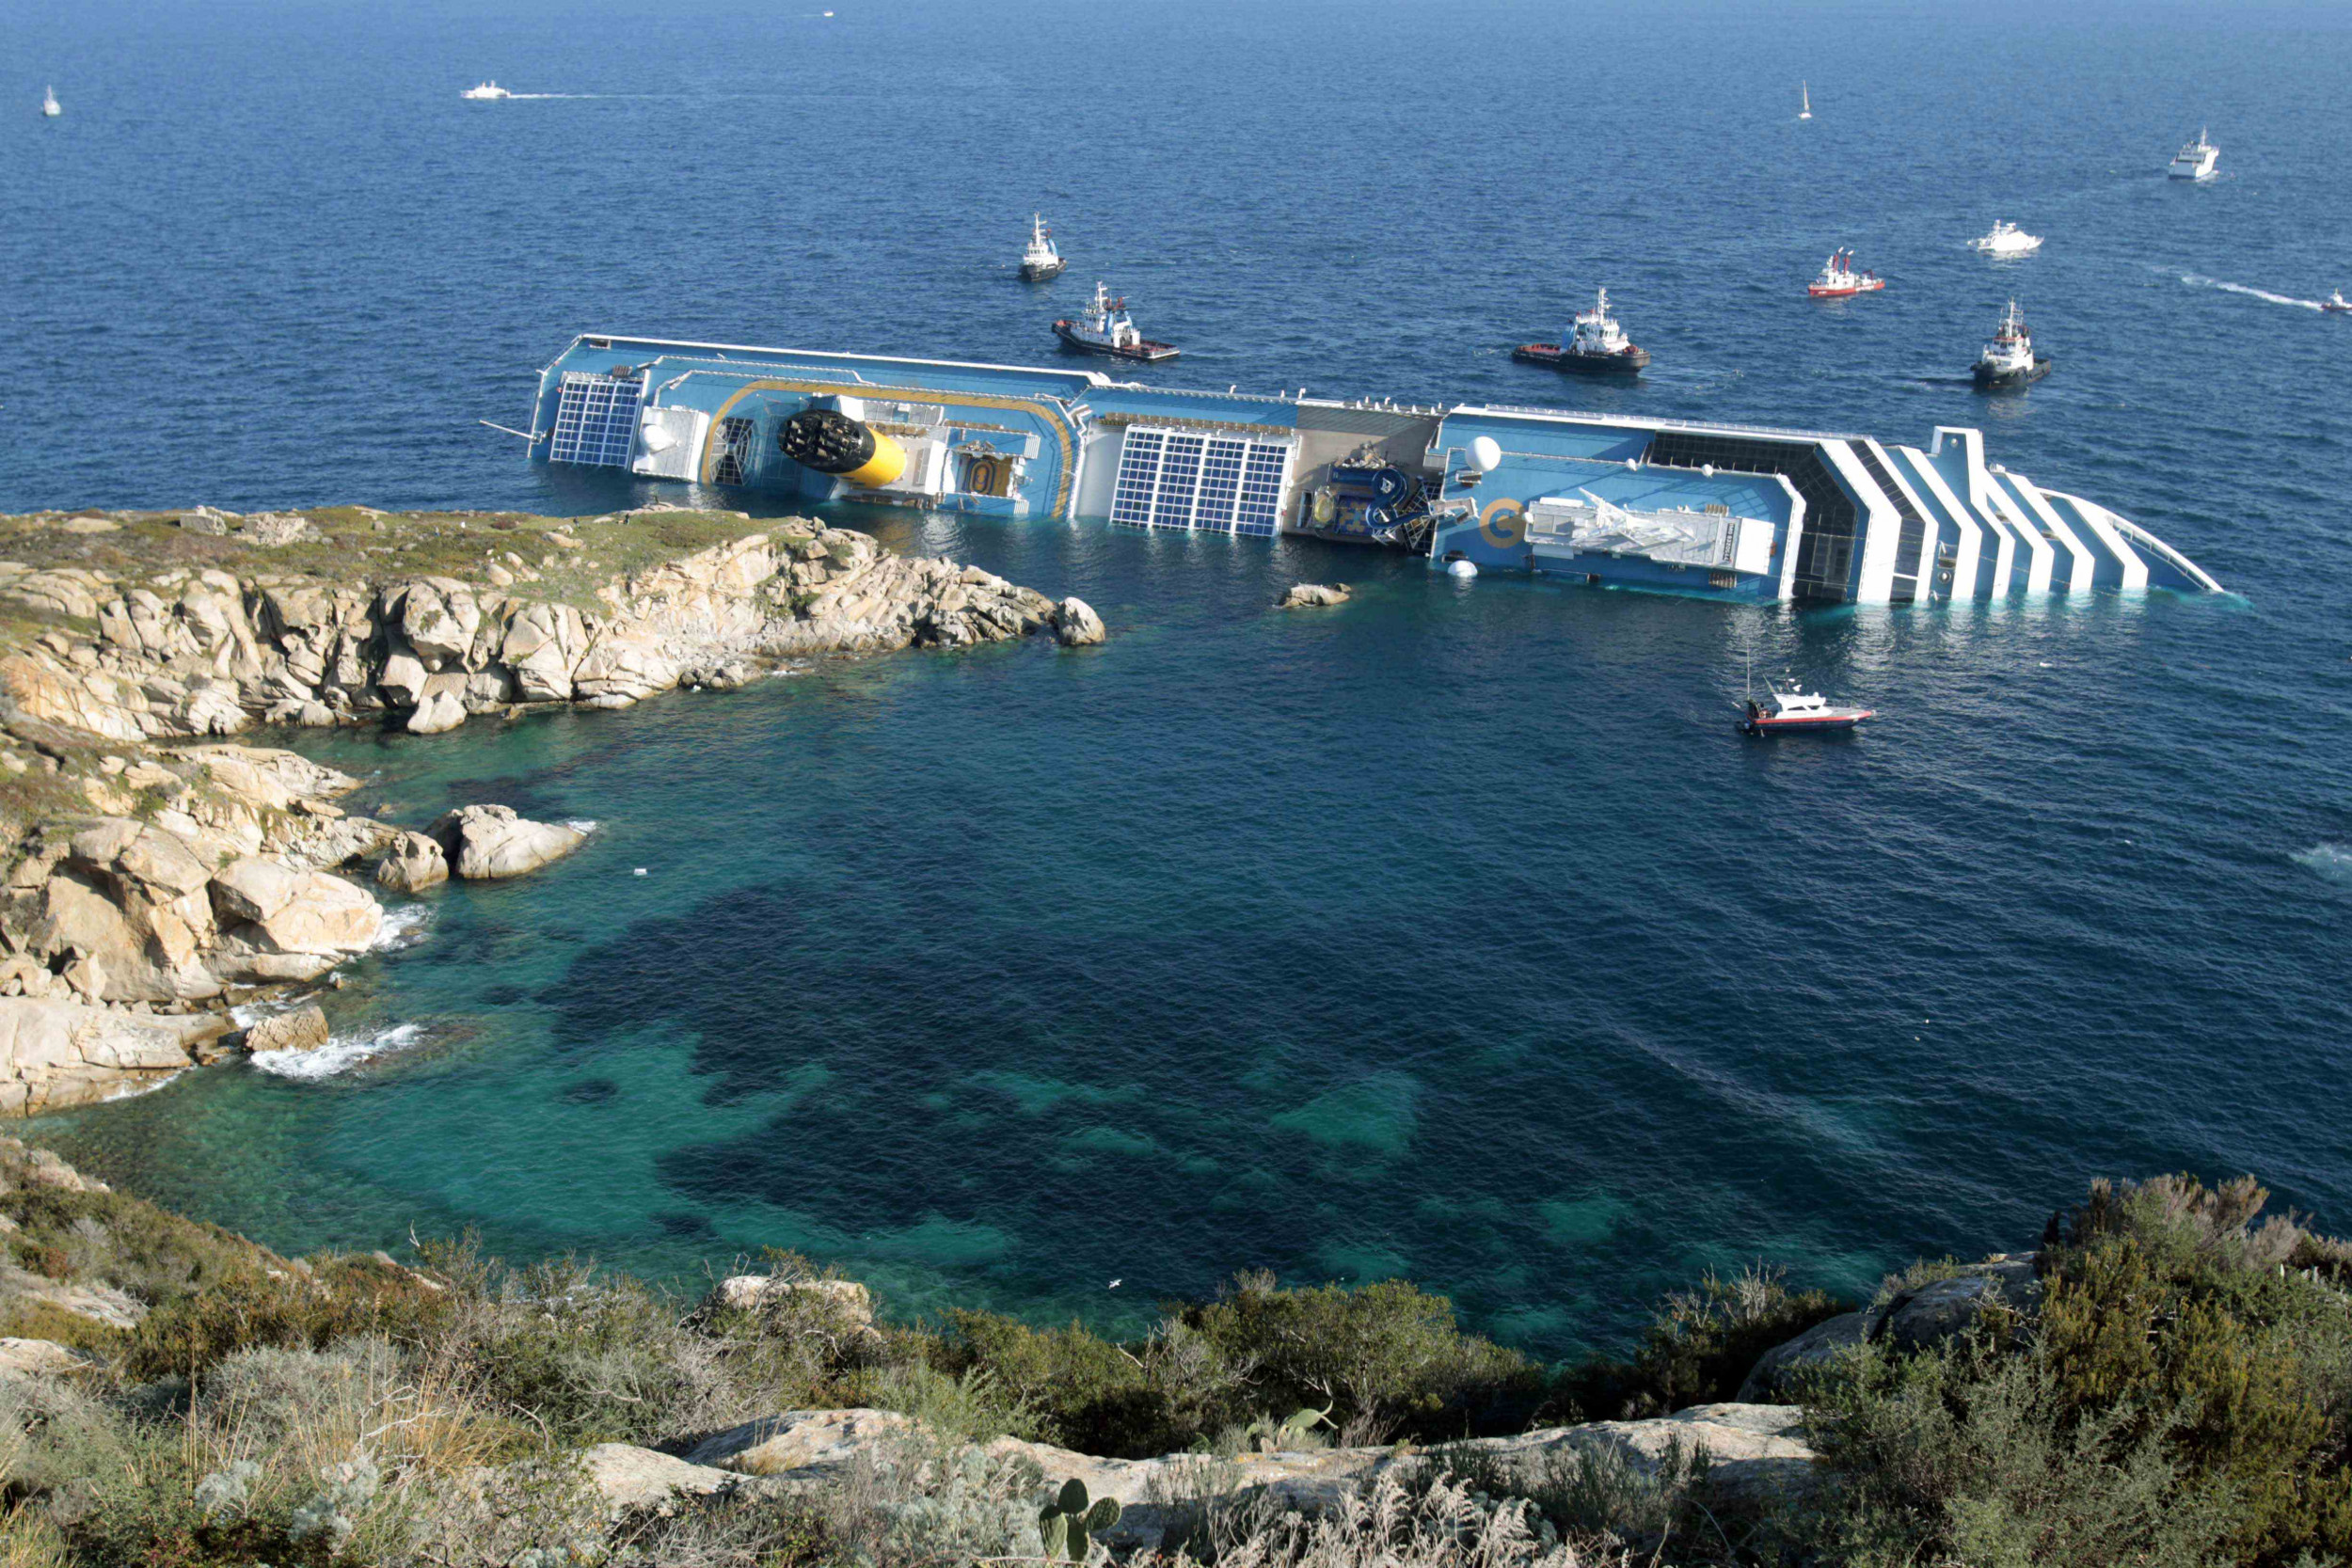 Passenger Who Suffers PTSD After Deadly Crash of Costa Concordia Cruise